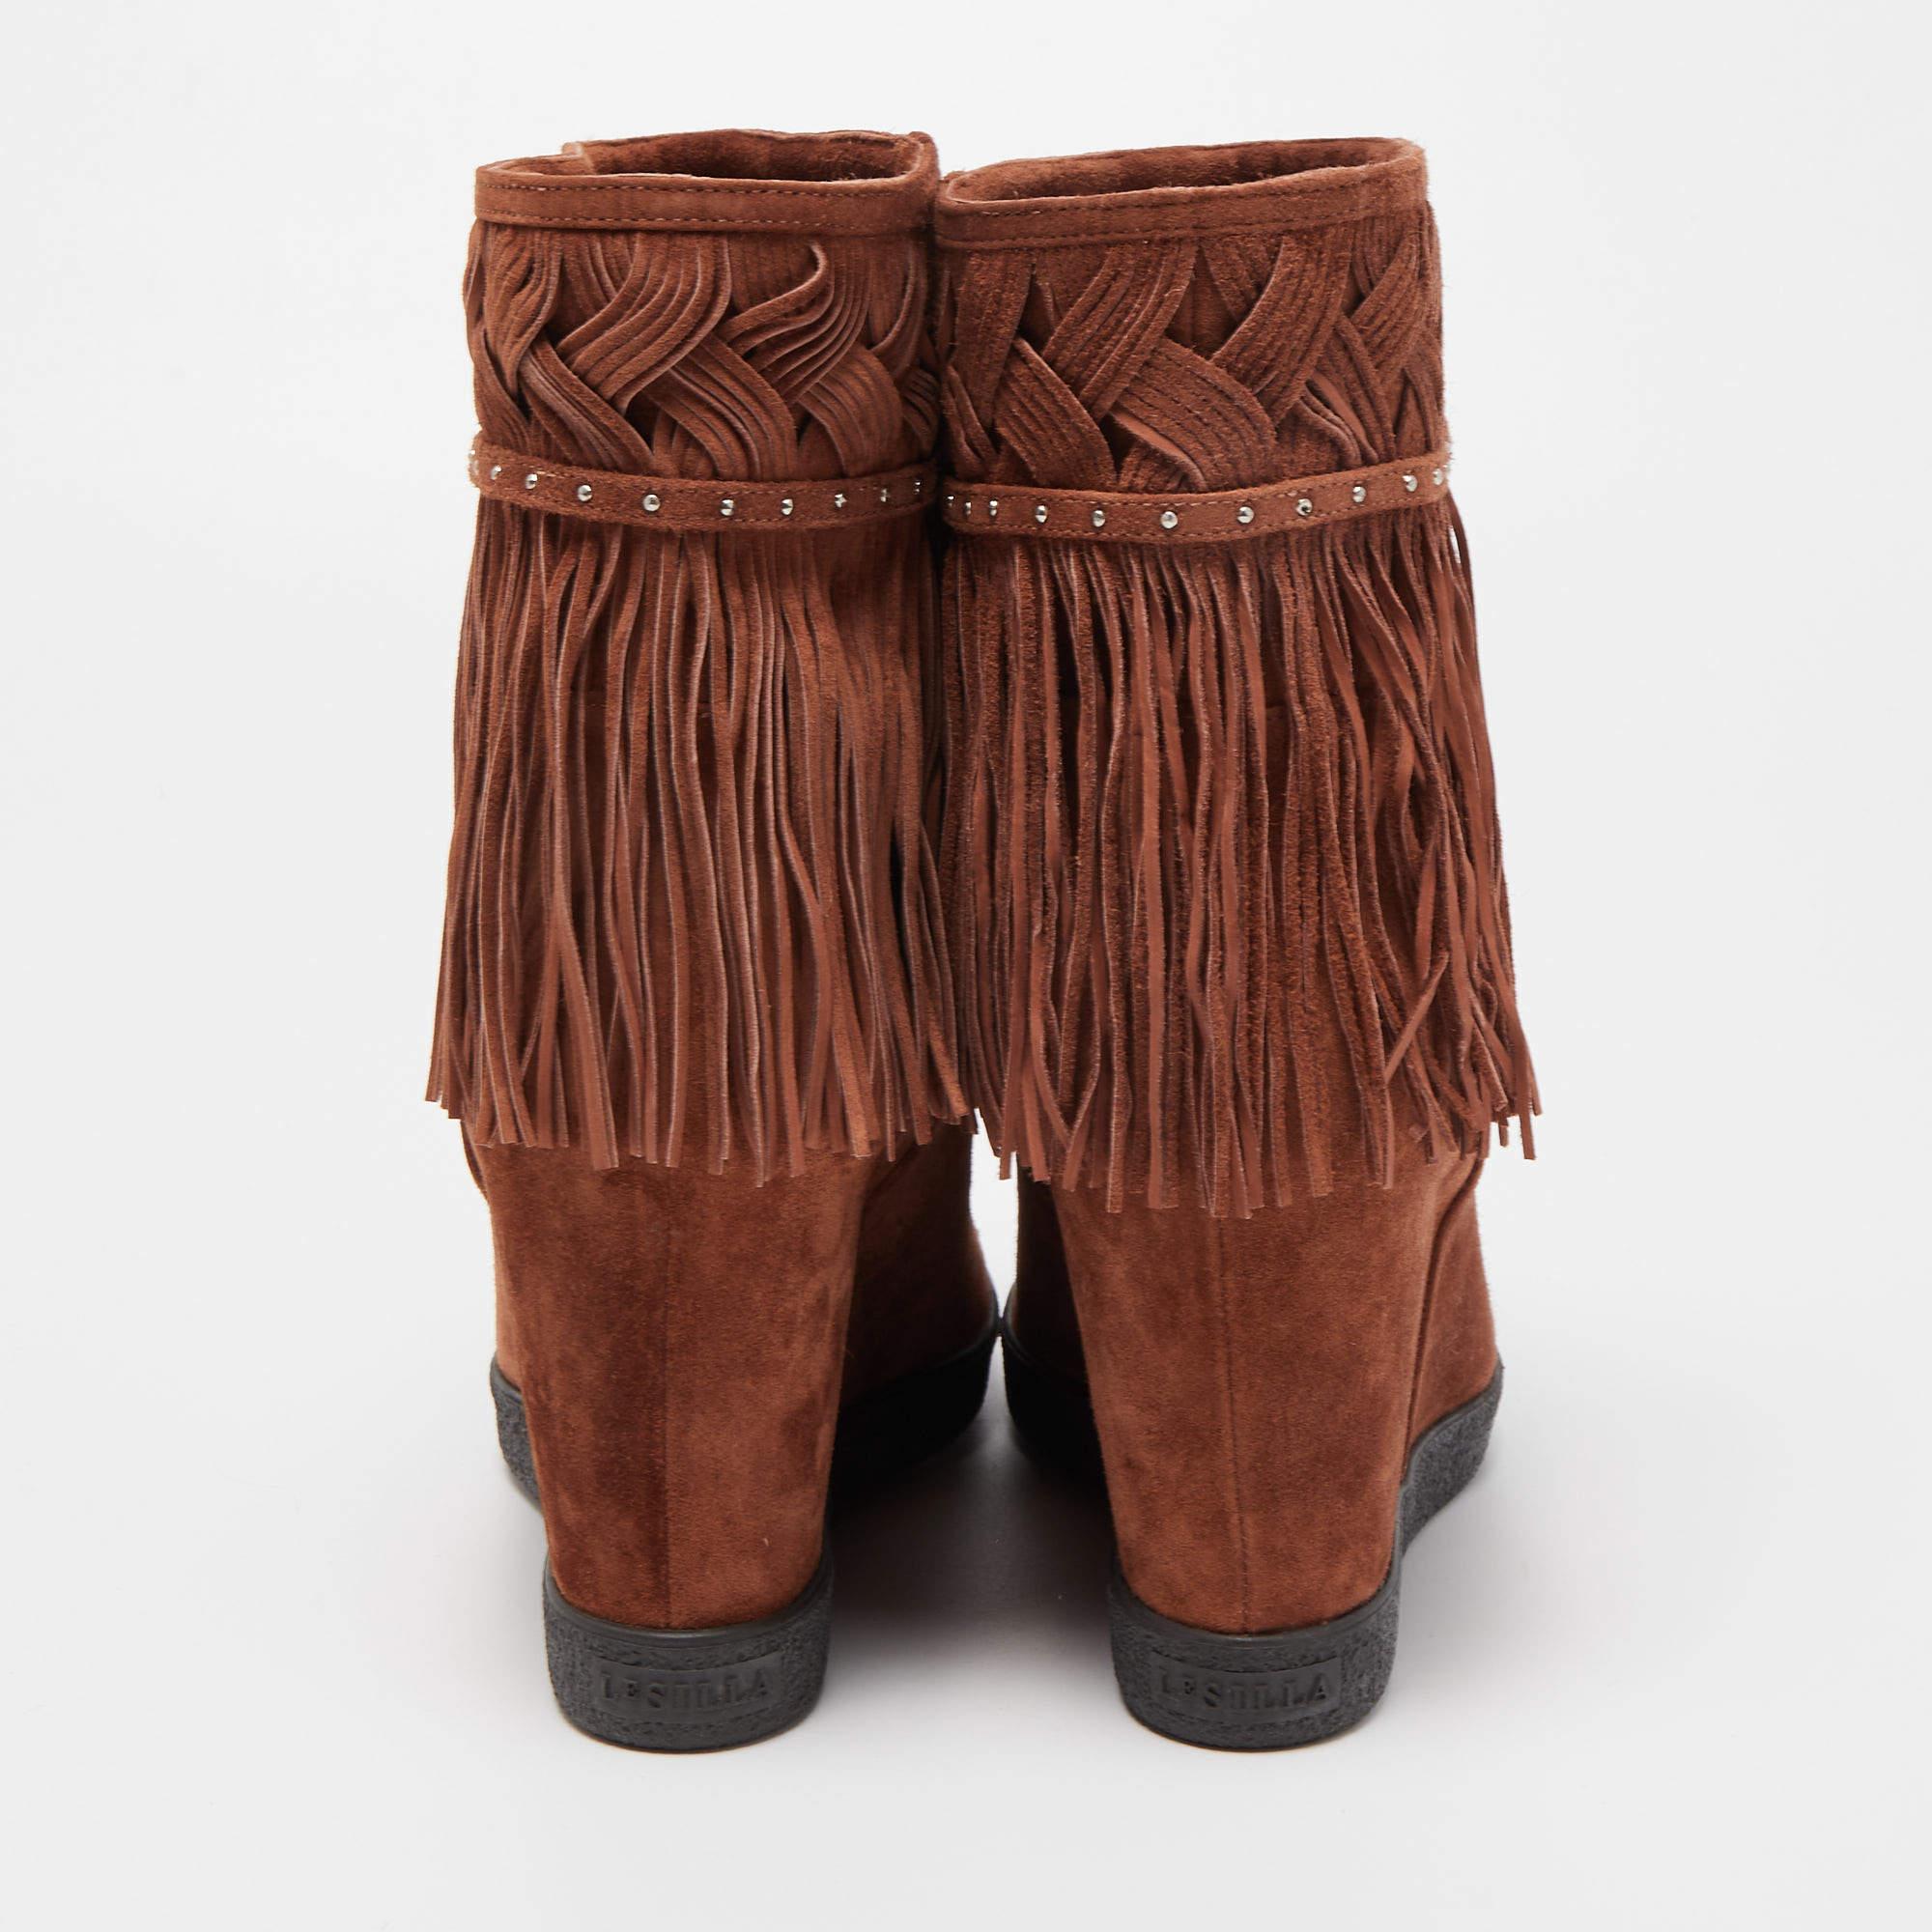 Le Silla Brown Suede Fringe Ankle Boots Size 38 5